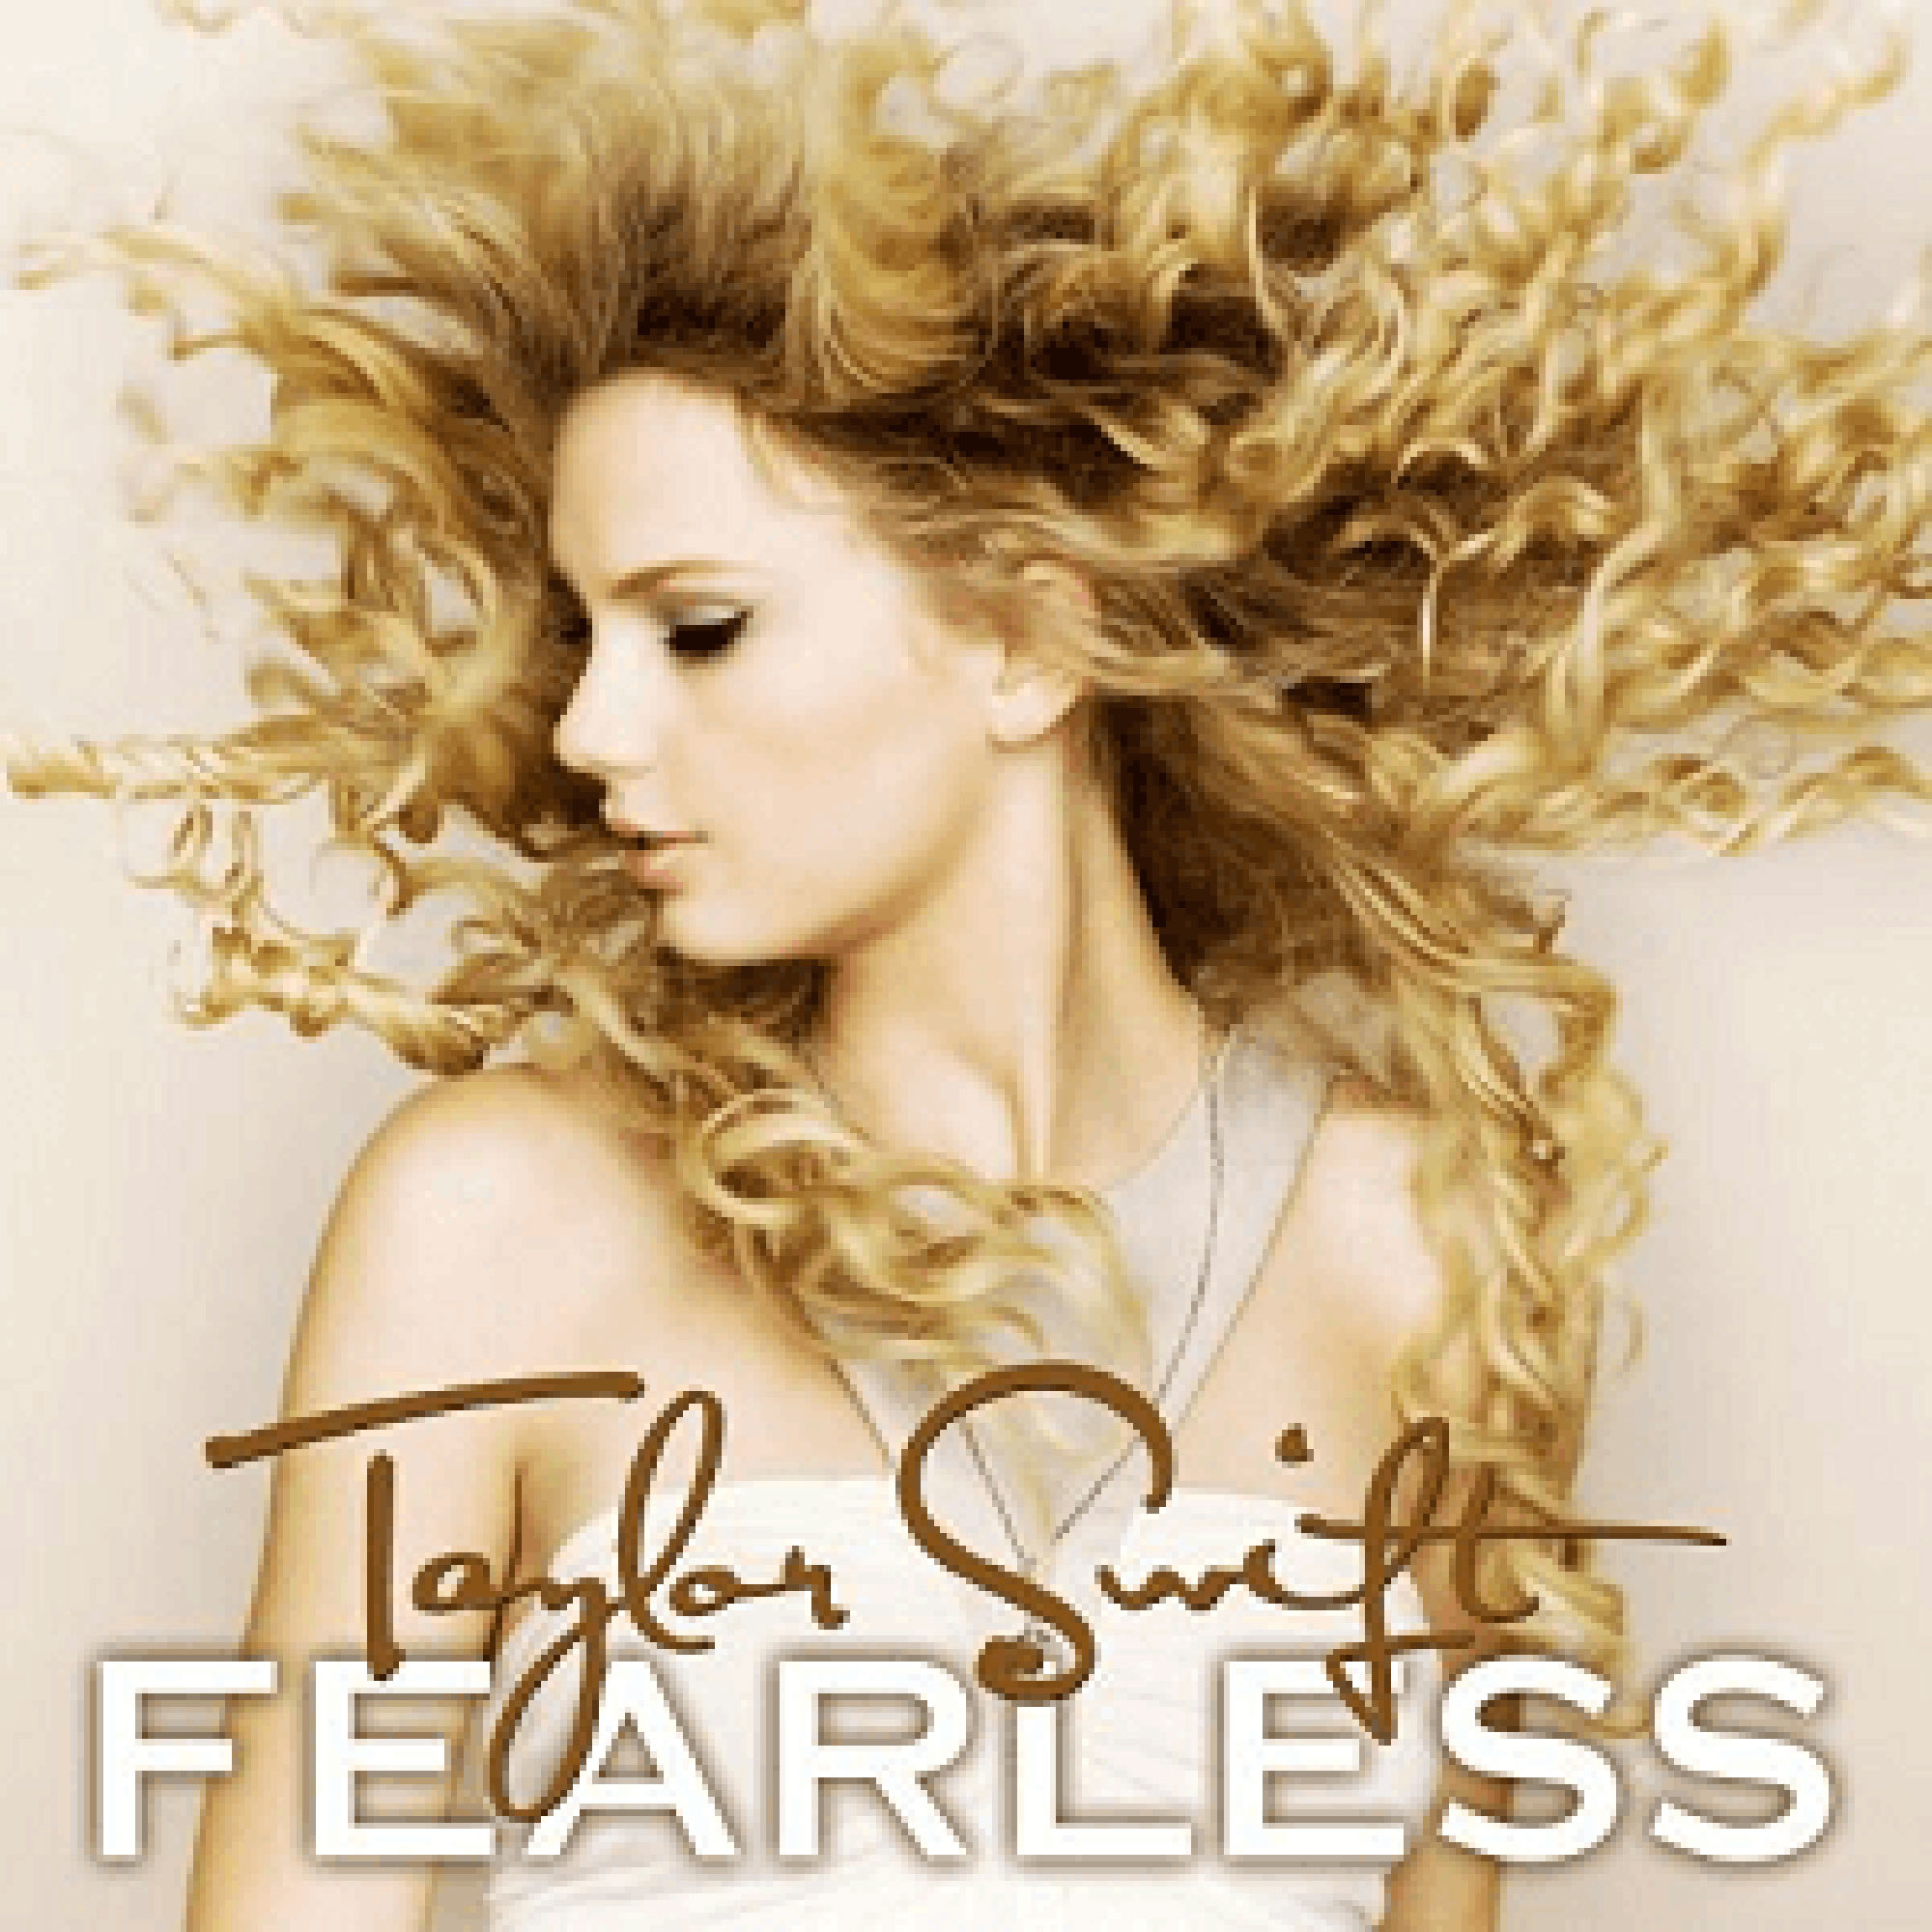 Fearless album cover, taylor swift looks down and her curly hair flies about her head